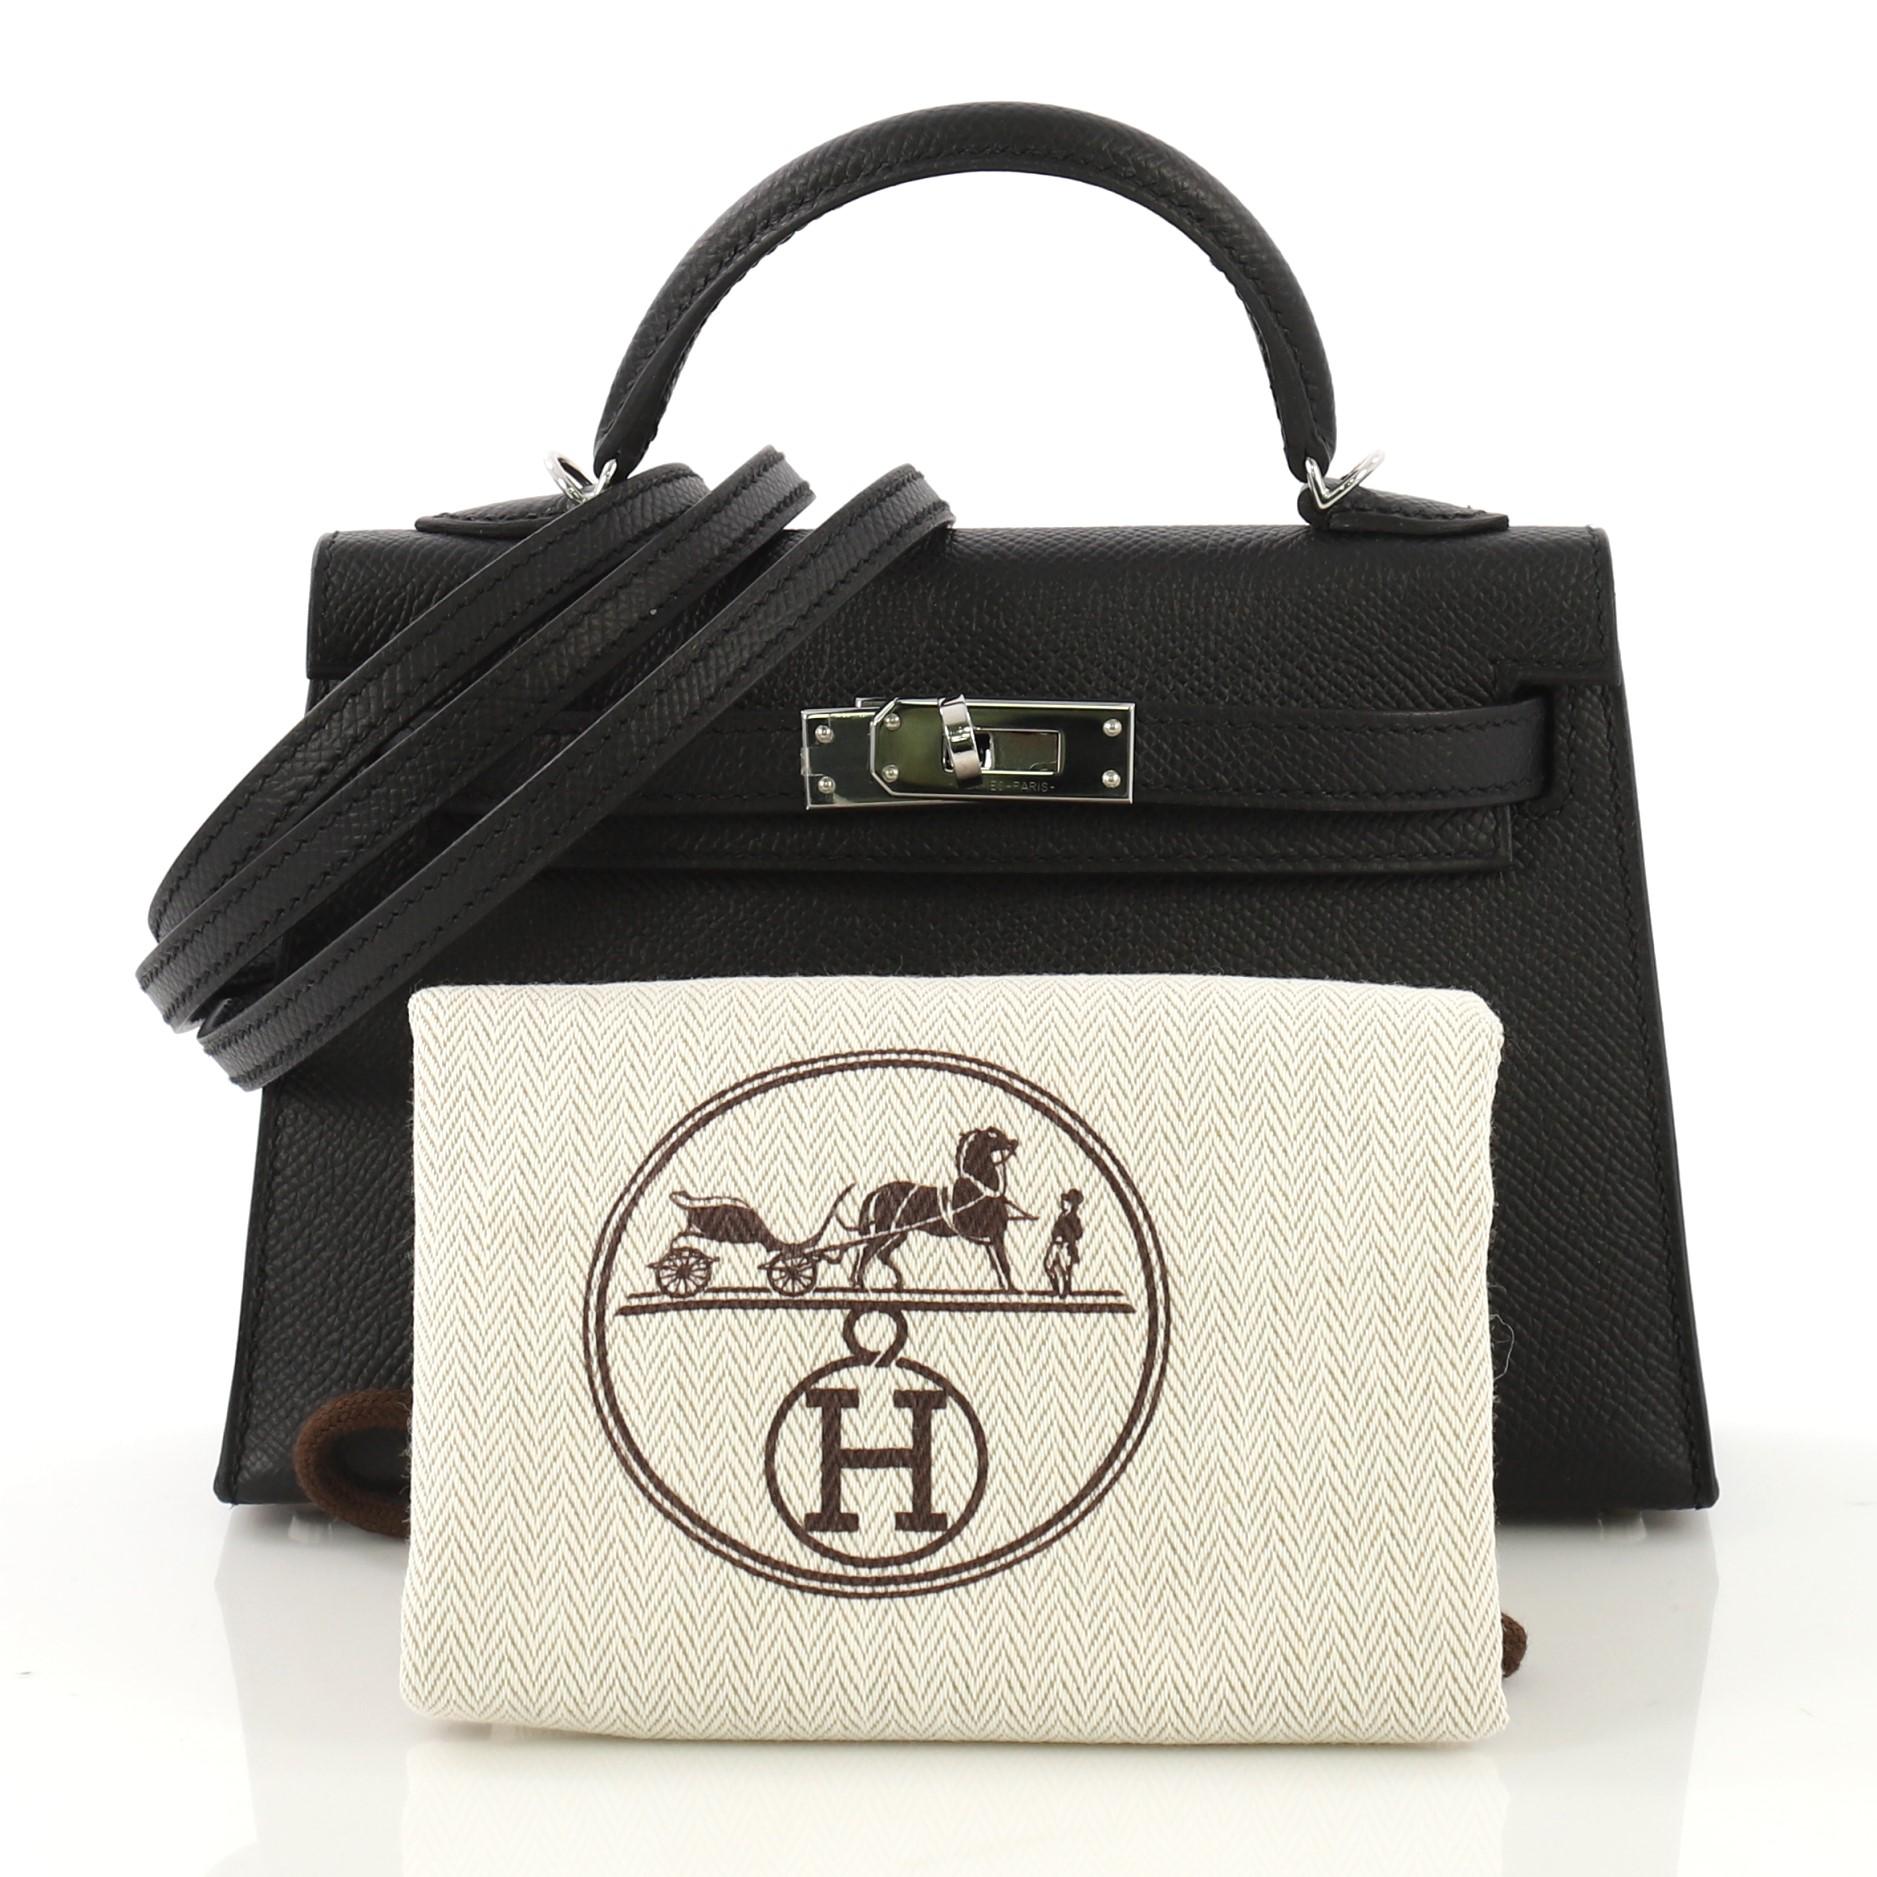 This Hermes Kelly Mini II Handbag Noir Epsom with Palladium Hardware 20, crafted in Noir black Epsom leather, features a single rolled top handle, frontal flap, and palladium hardware. Its turn-lock closure opens to a Noir black Agneau leather